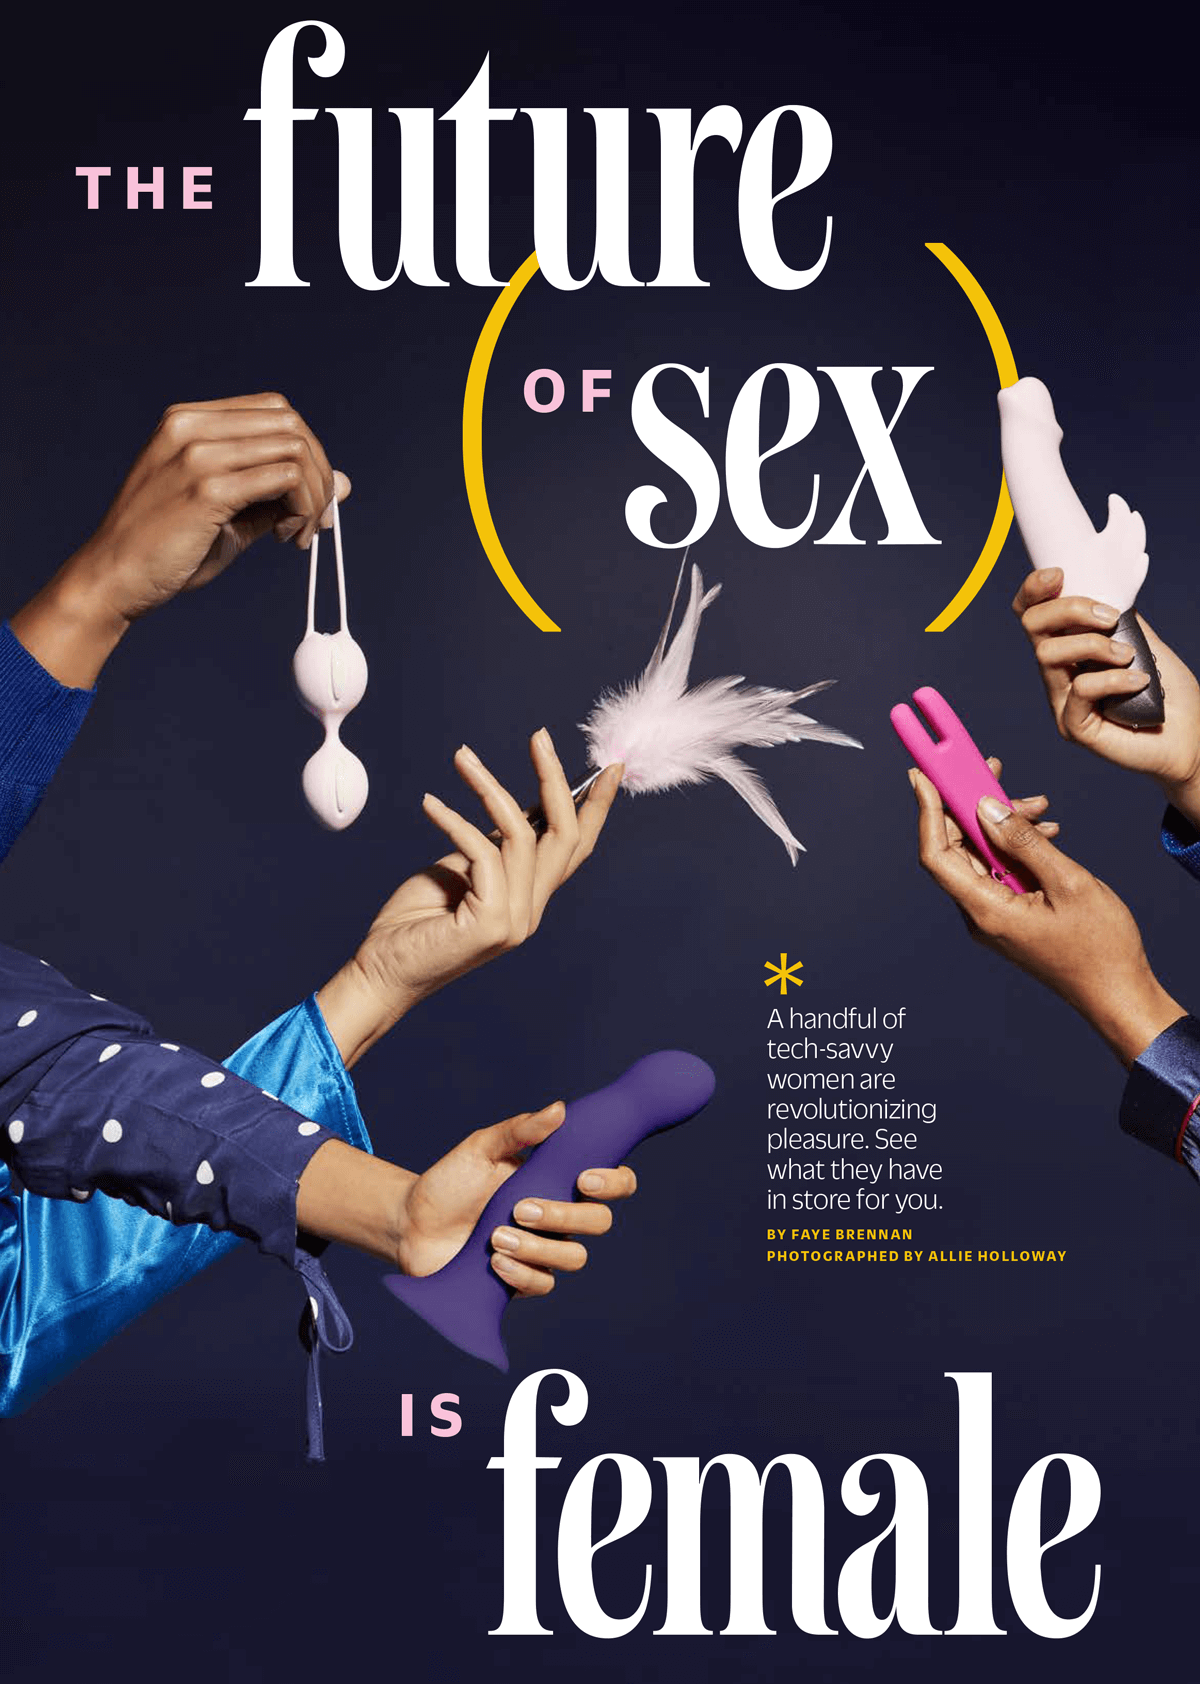 Cosmo speaks to Le Wand's founder Alicia Sinclair about how women are revolutionizing pleasure.